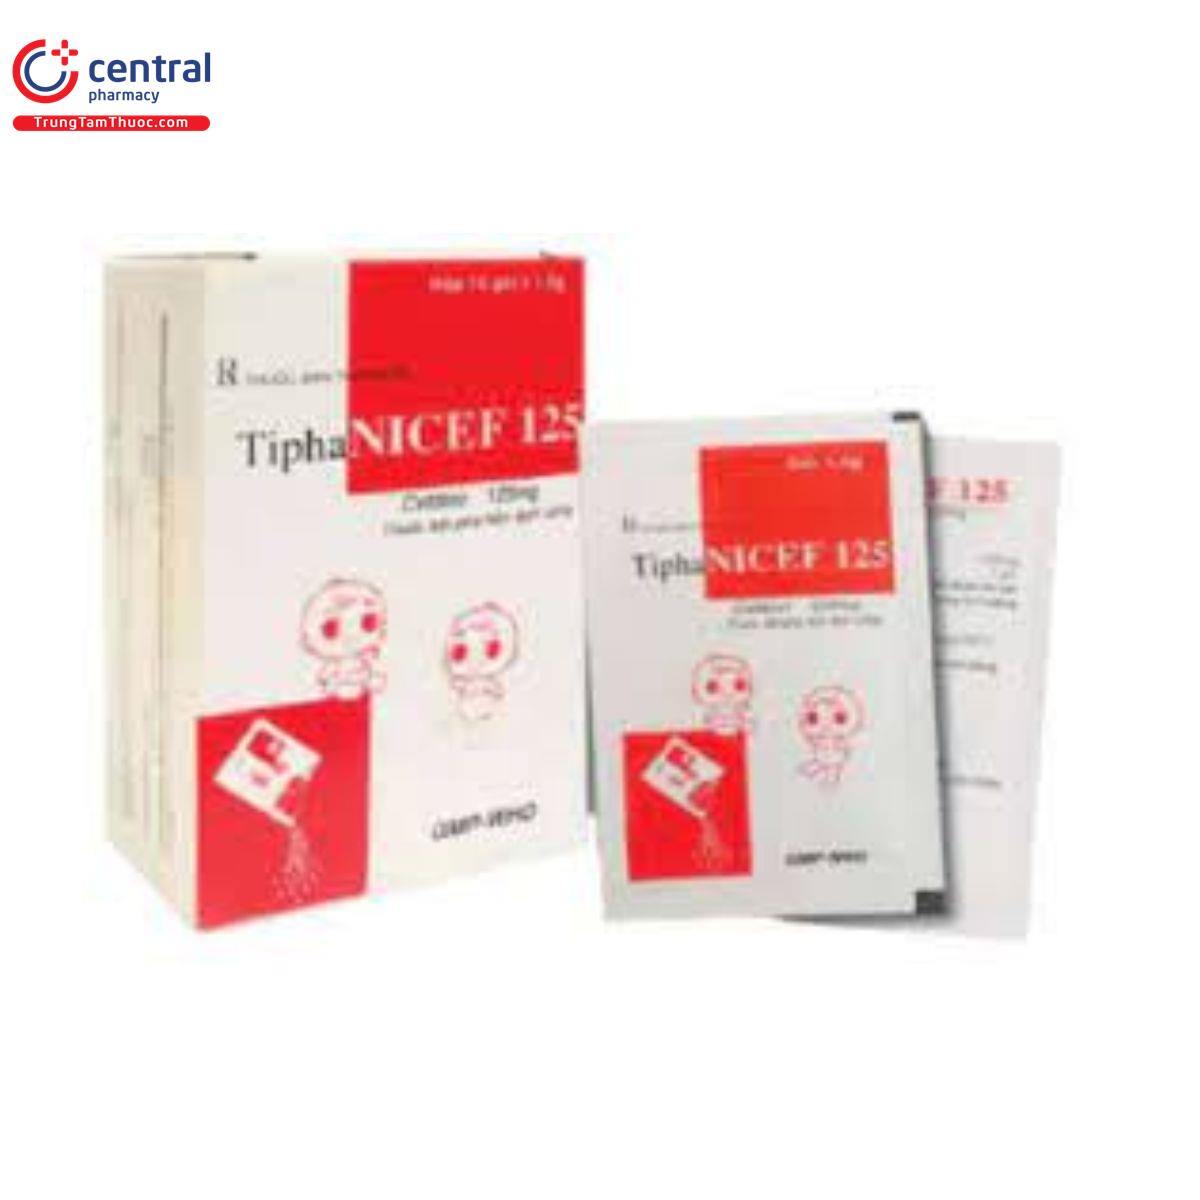 thuoc tiphanicef 125 5 R7038